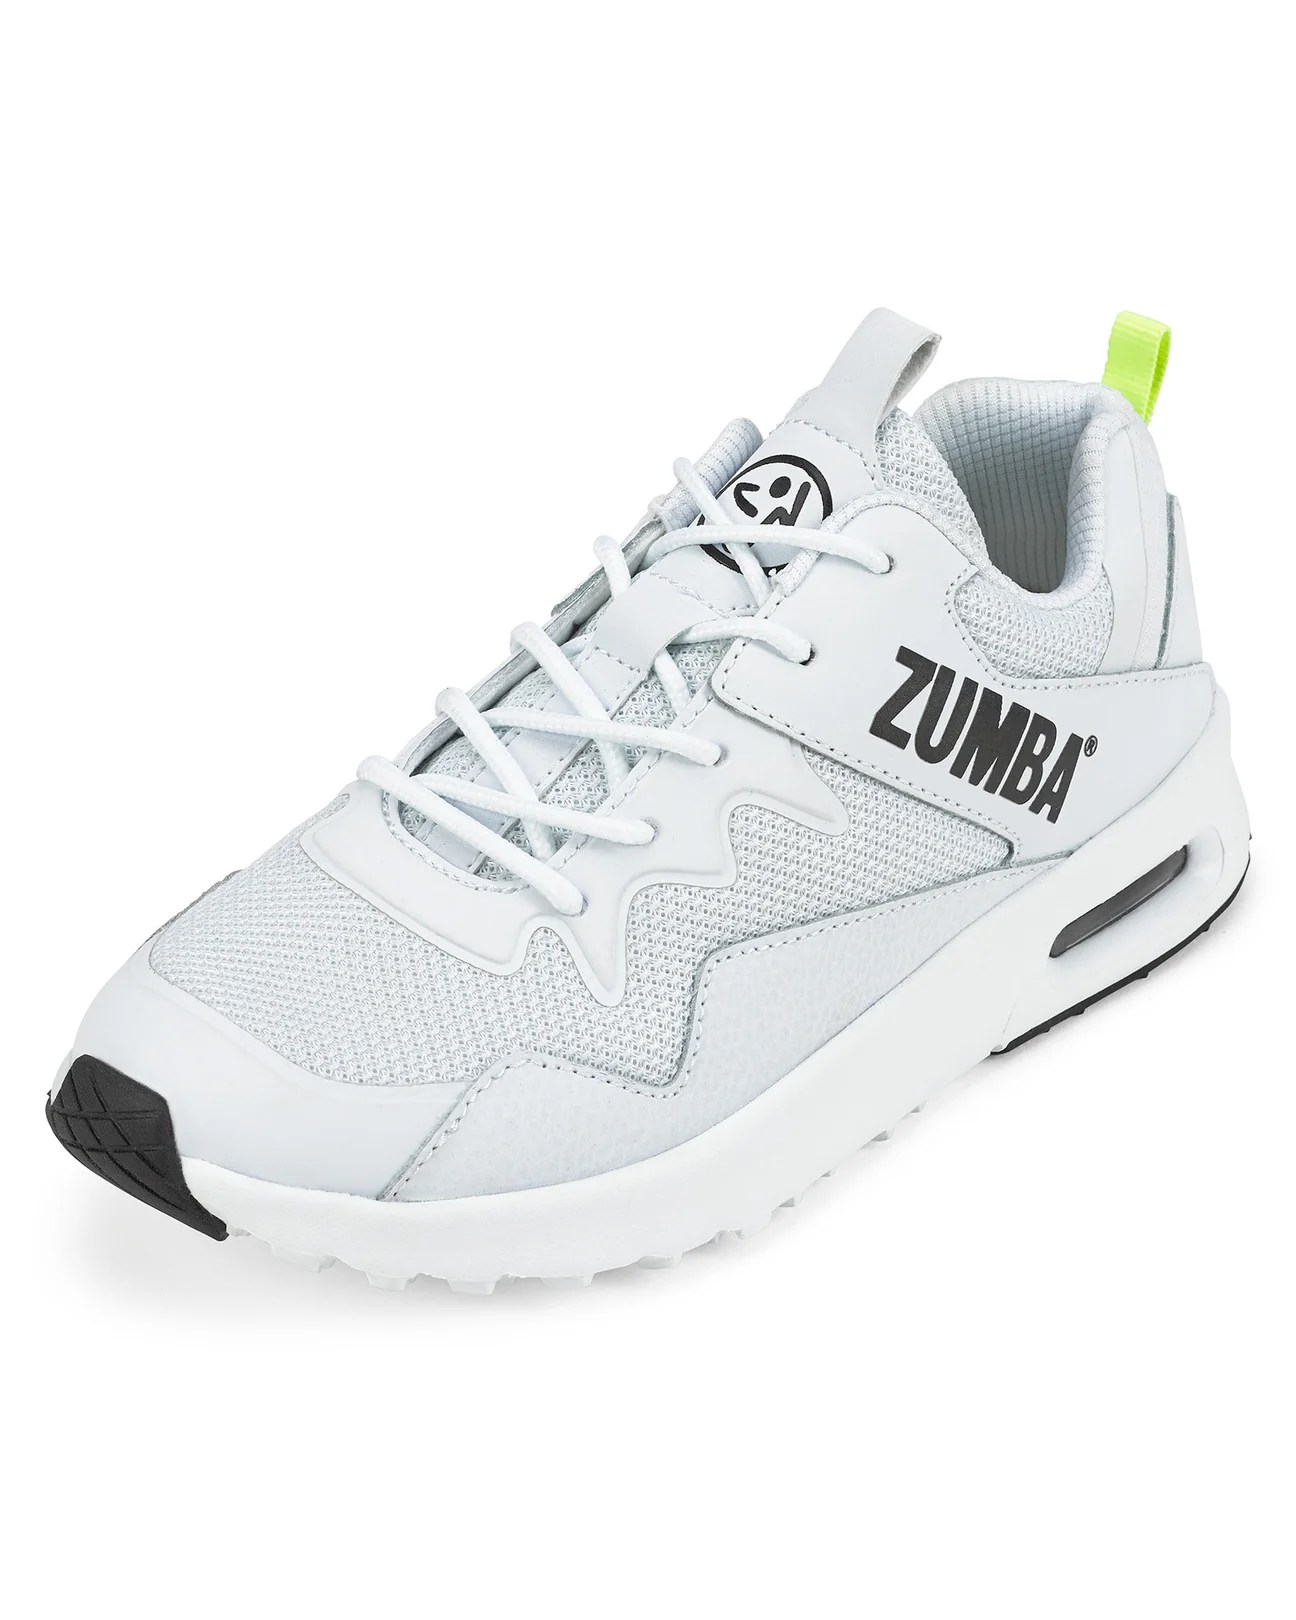 zumba air classic, one of the best shoes for zumba